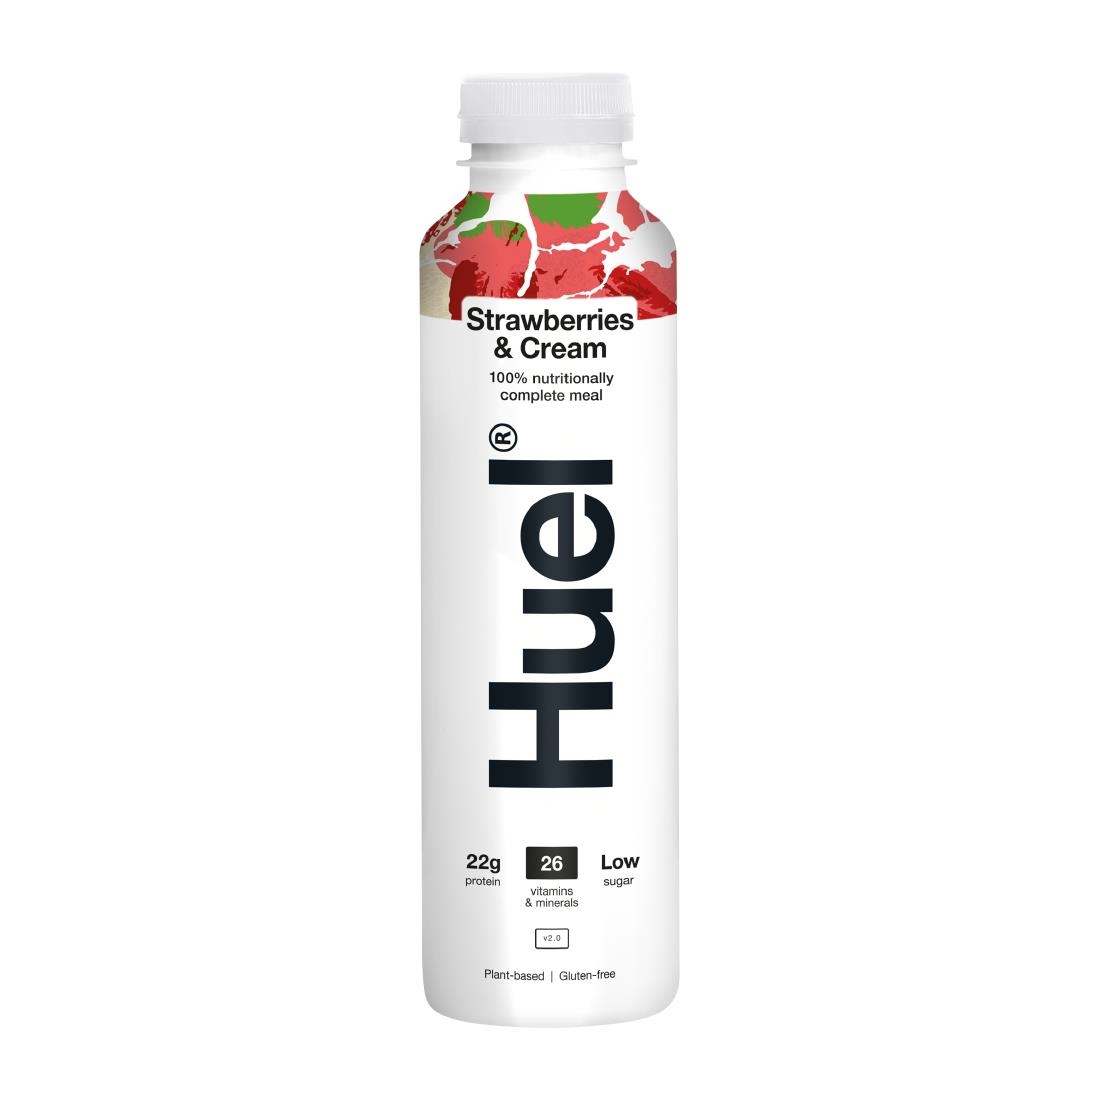 HUEL 100 Nutritionally Complete Meal Drink - Strawberries and Cream 500ml Pack of 8 (HS546)